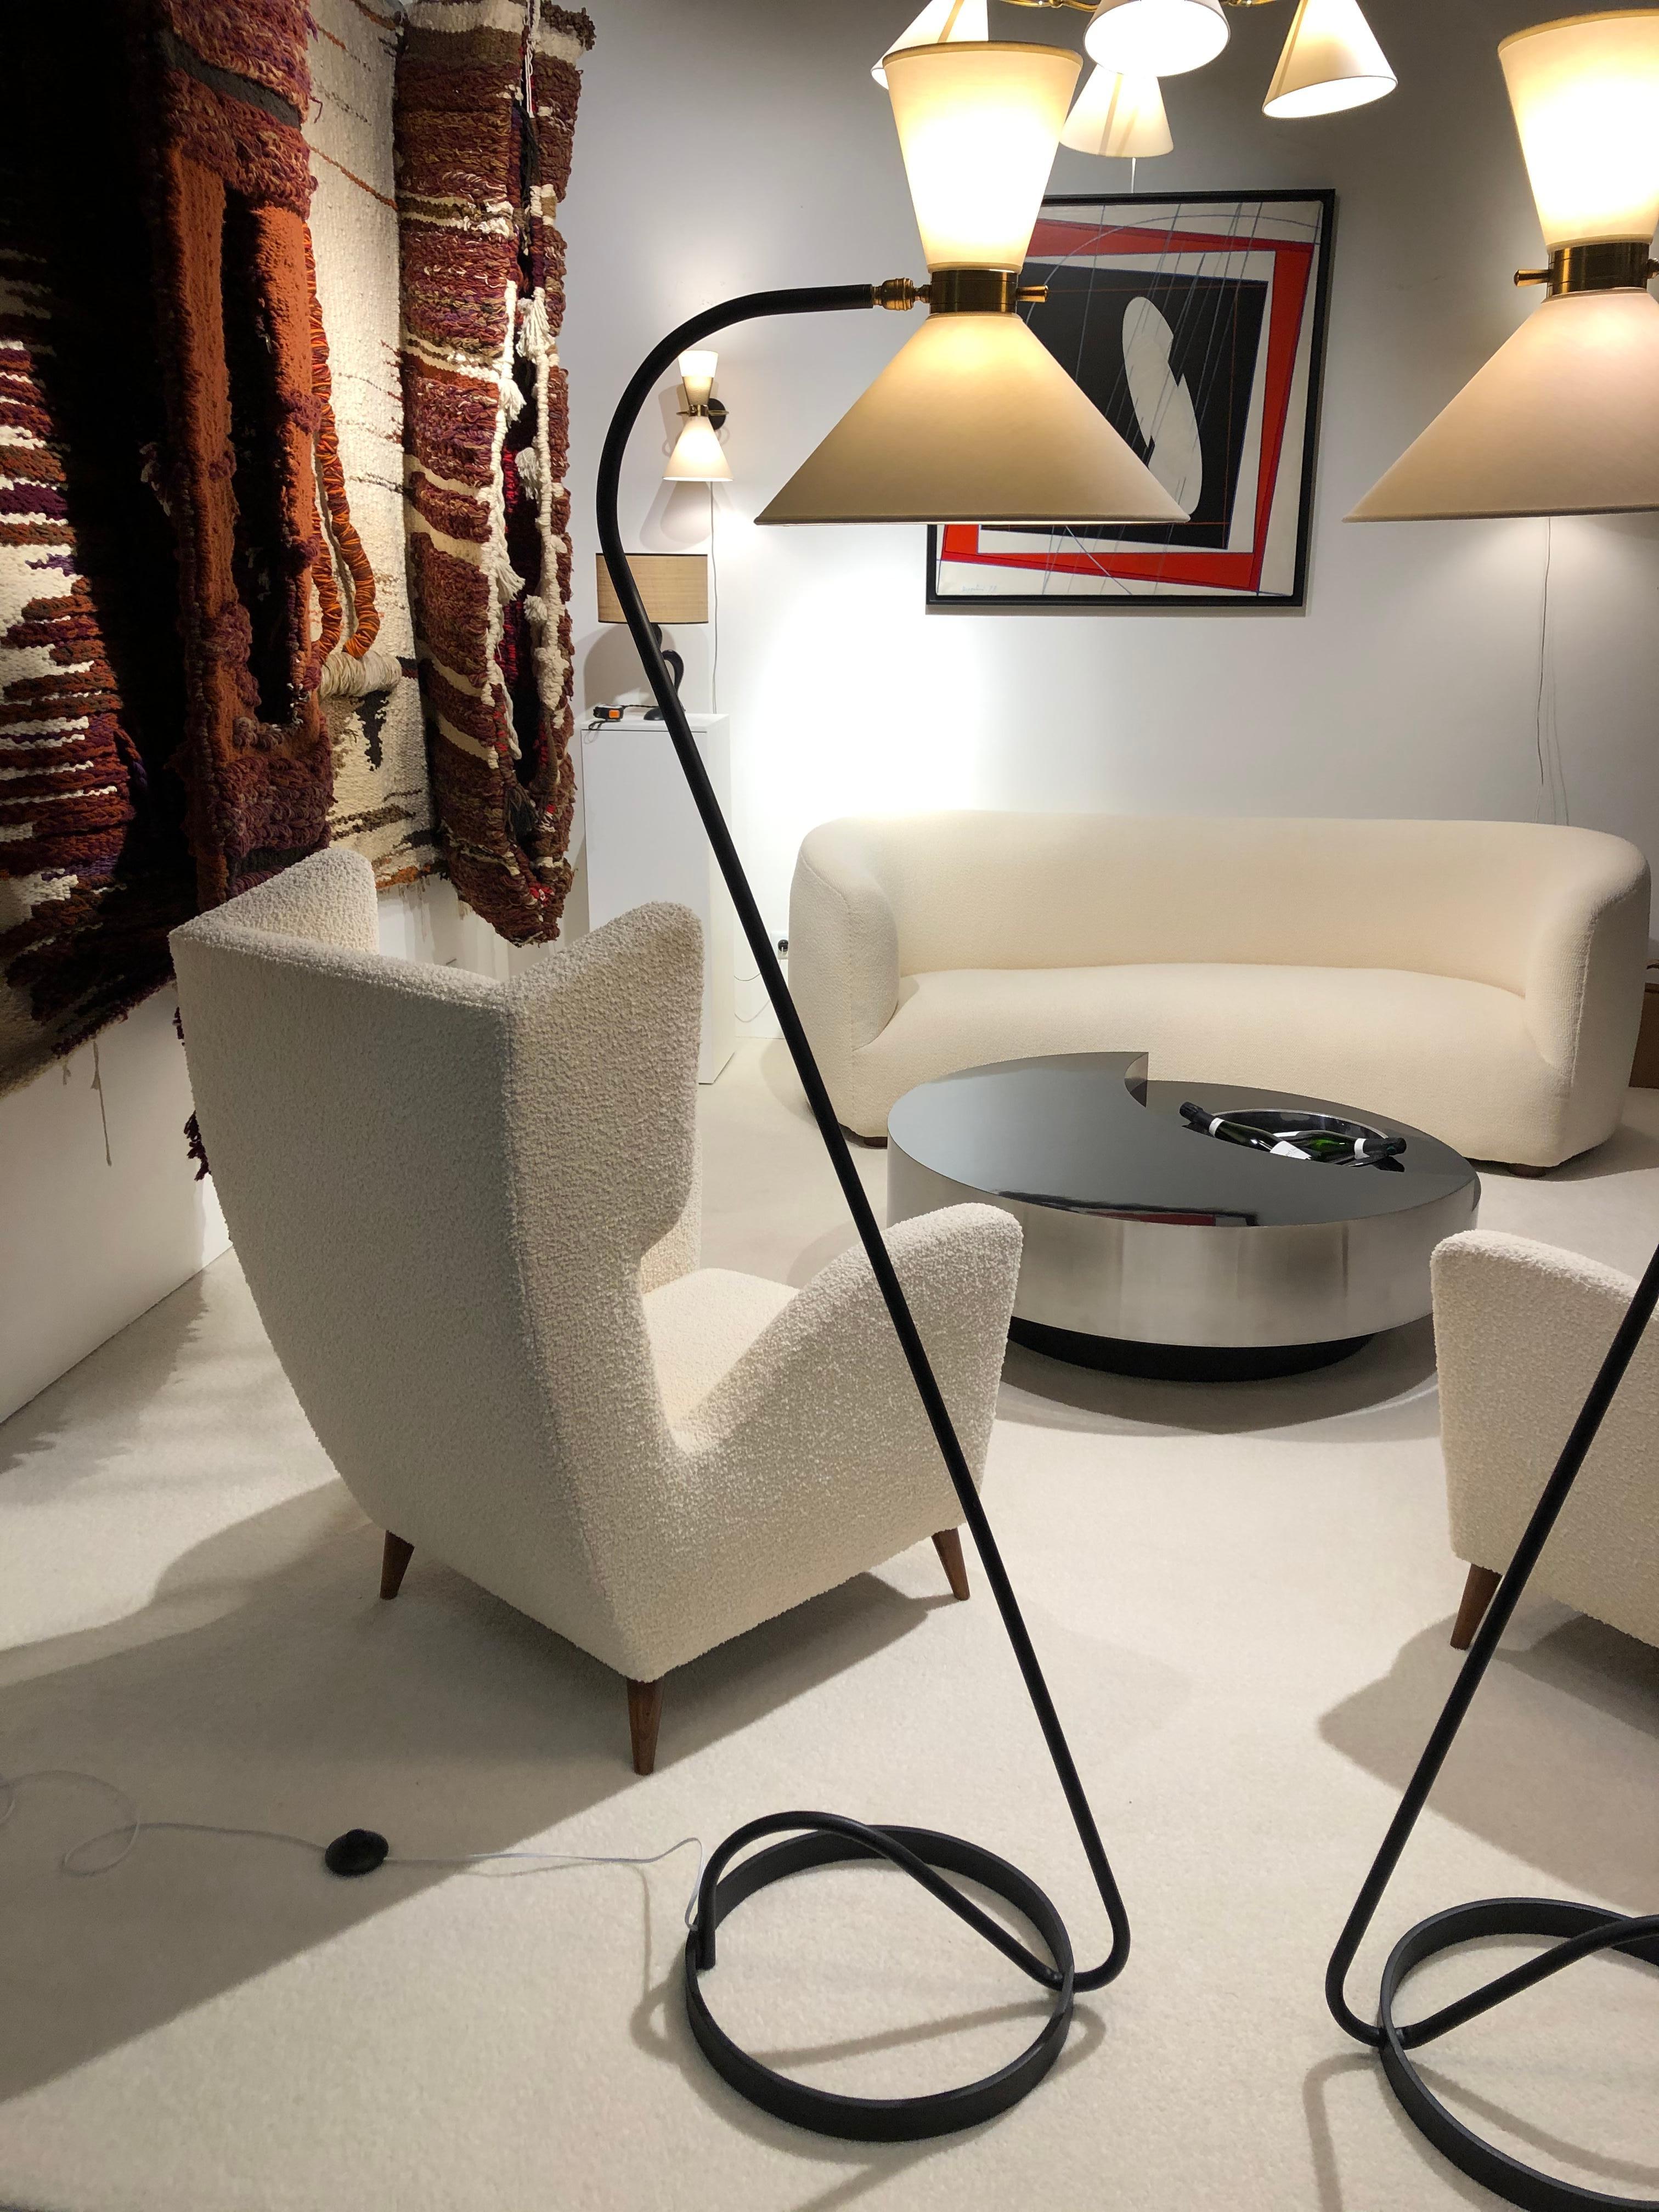 Pair of floor lamp in black lacquered metal and brass, composed of a circular base in black lacquered,
a brass ring articulated by a ball joint, receiving on both sides two conical lampshades diffusing light. A brass handle allows easy